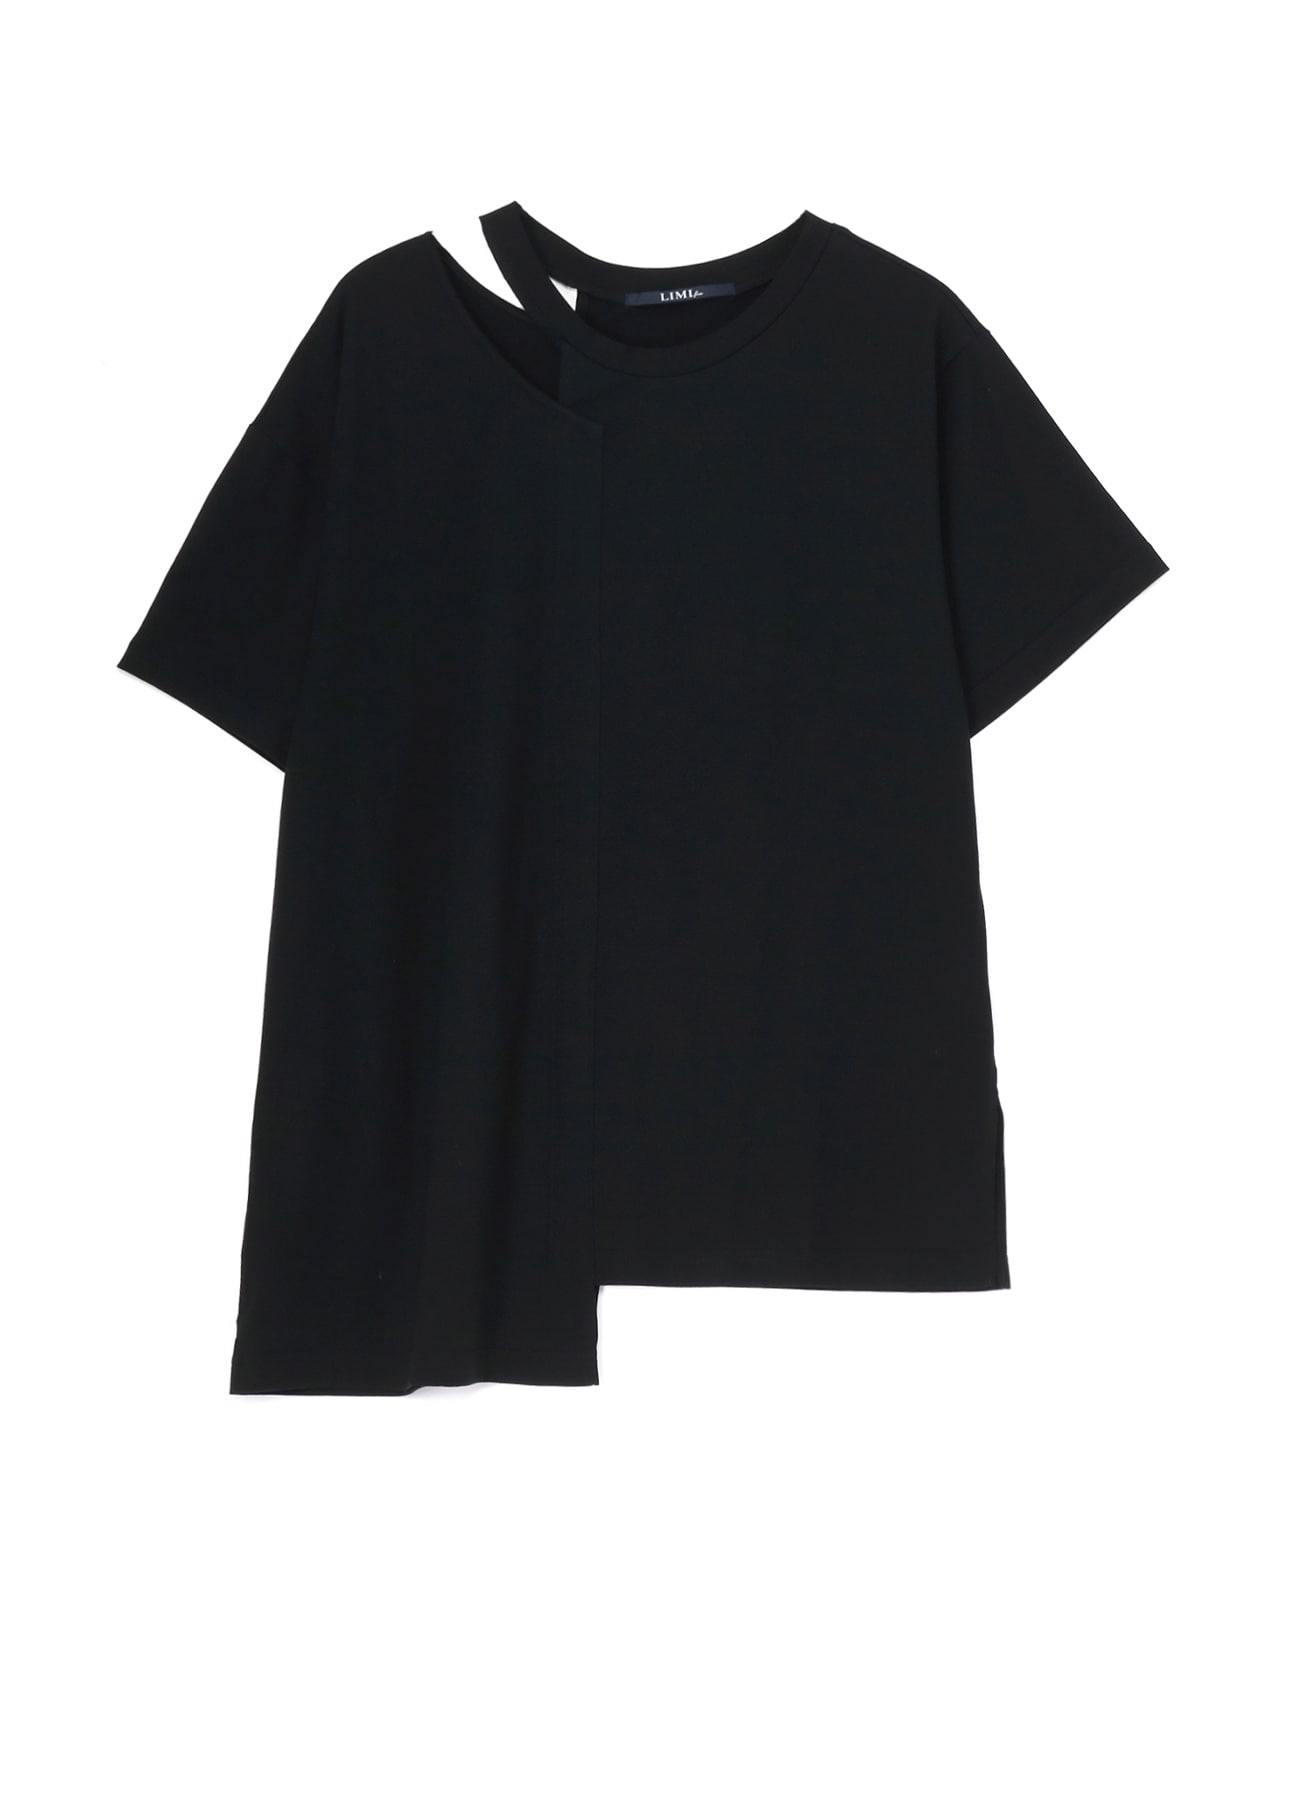 60/2 COTTON JERSEY FUSED T-SHIRT